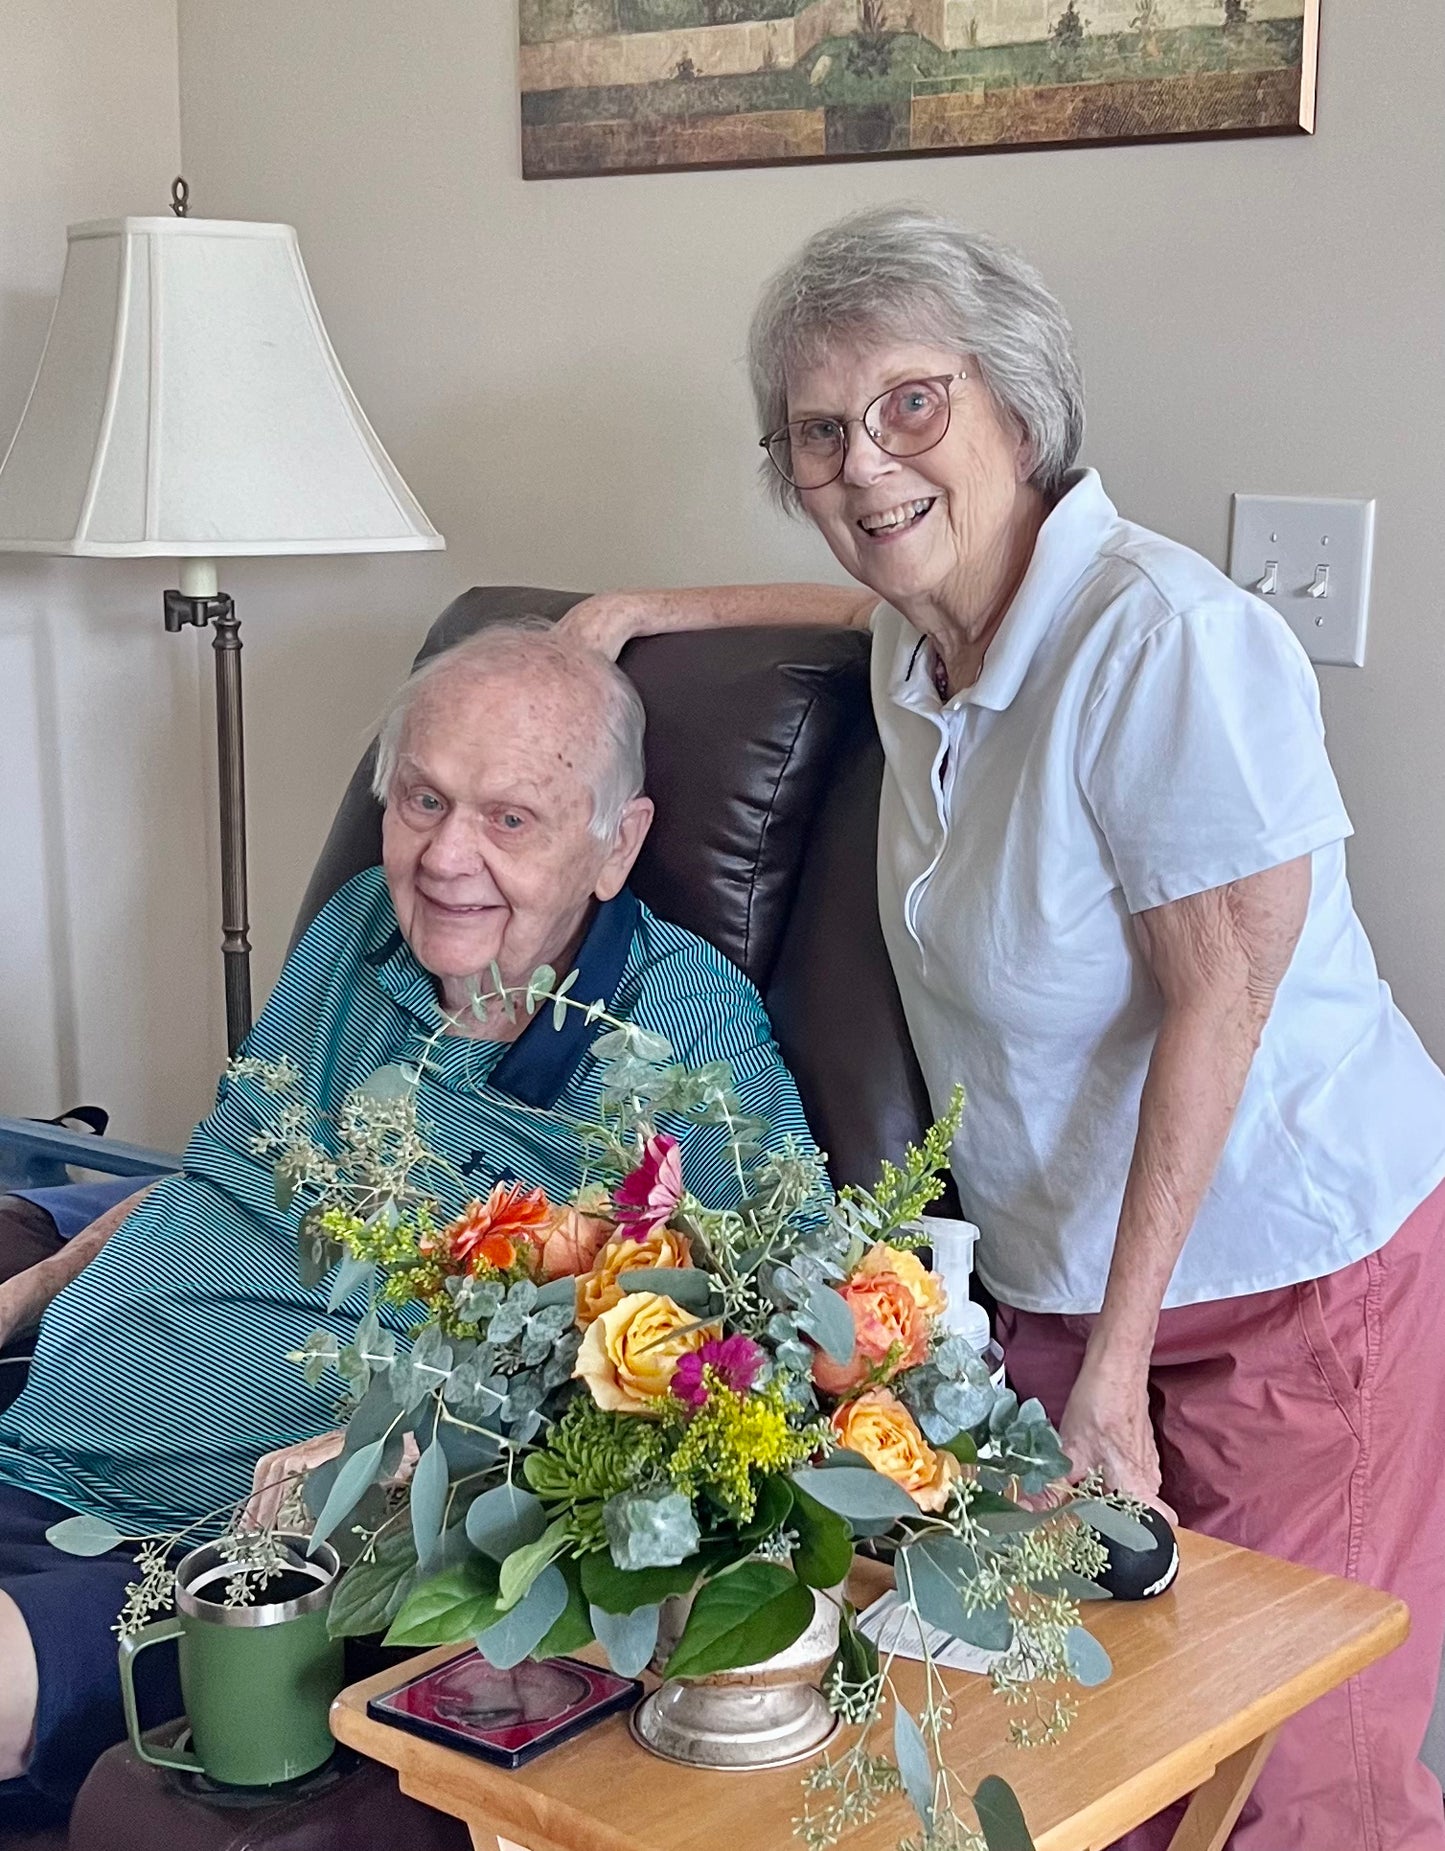 Monthly flowers for parents in assisted living. Gift for parents in assisted living in Mt Pleasant. Monthly flowers in Charleston, SC. Flowers for assisted living resident. Flowers for mother. 